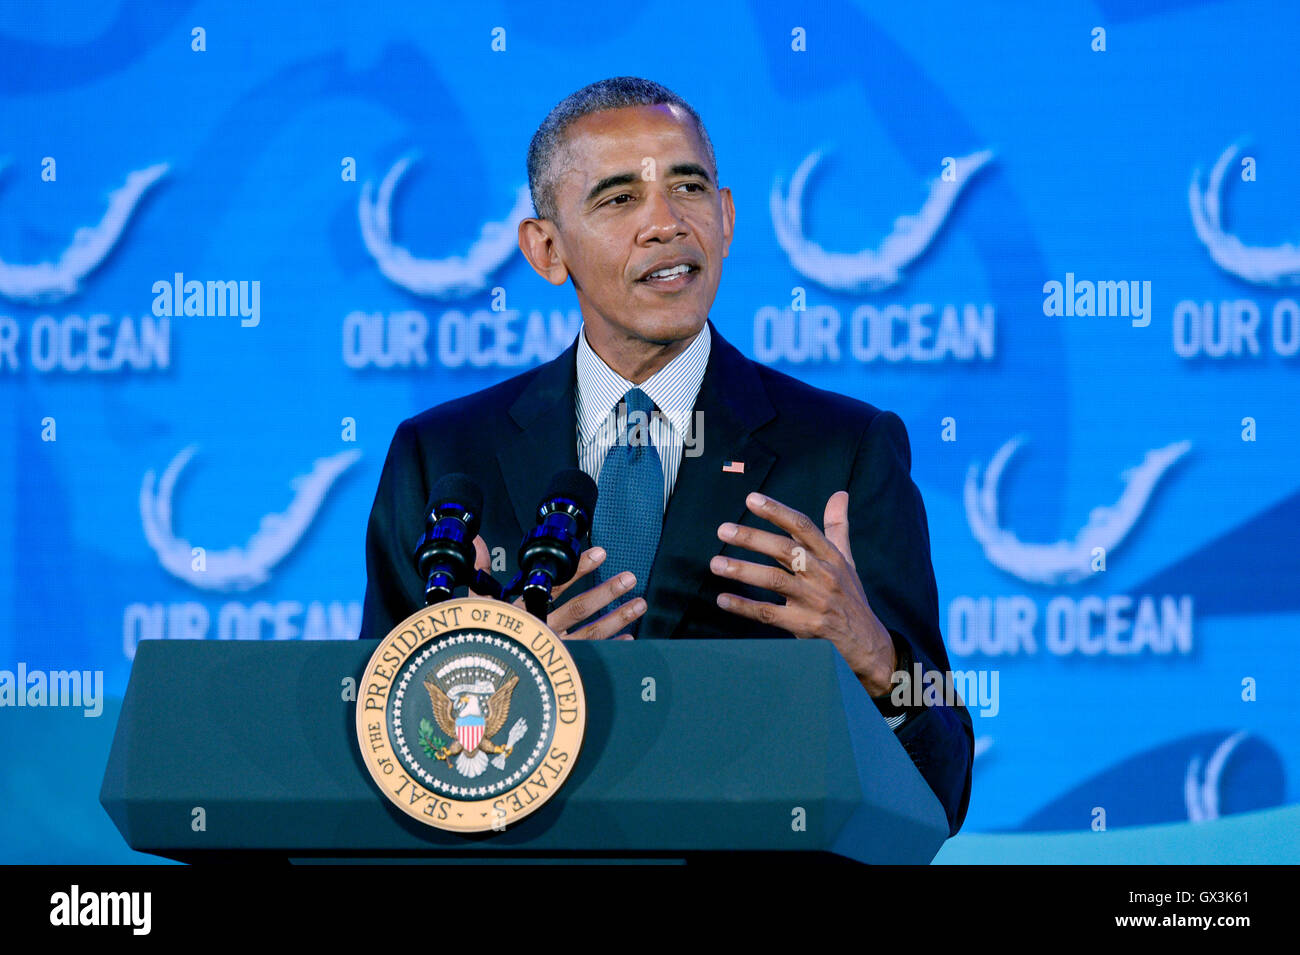 Washington DC, USA. 15th September, 2016. United States President Barack Obama speaks at the 2016 Our Ocean Conference at the State Department, September 15 2016, in Washington, DC. On Thursday the President will establish the first national marine monument in the Atlantic, a move that's designed to permanently protect nearly 5,000 square miles of underwater canyons and mountains off the coast of New England. Credit:  MediaPunch Inc/Alamy Live News Stock Photo